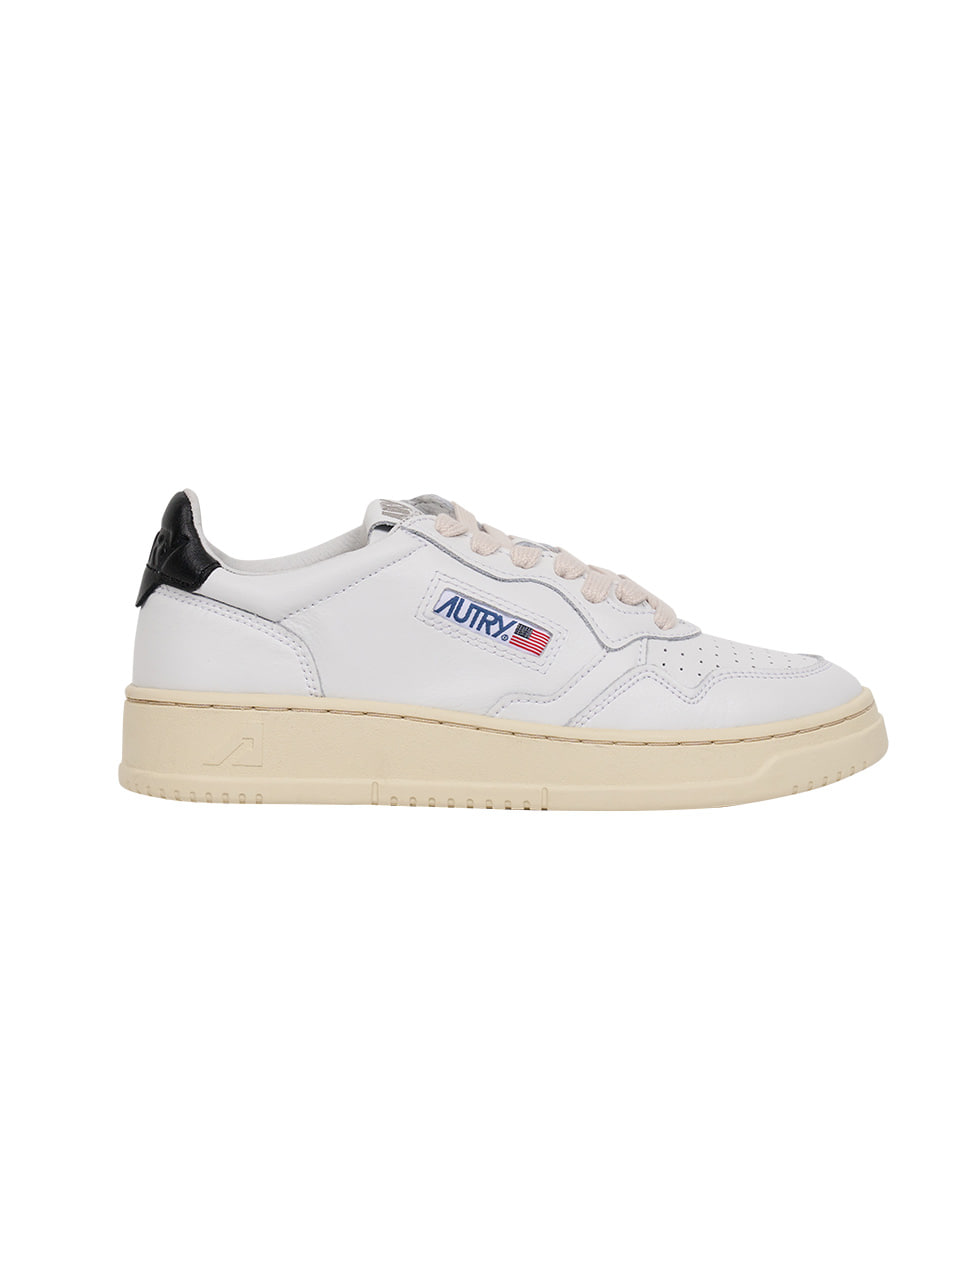 AUTRY - MEDALIST SNEAKERS (WHITE/BLACK)